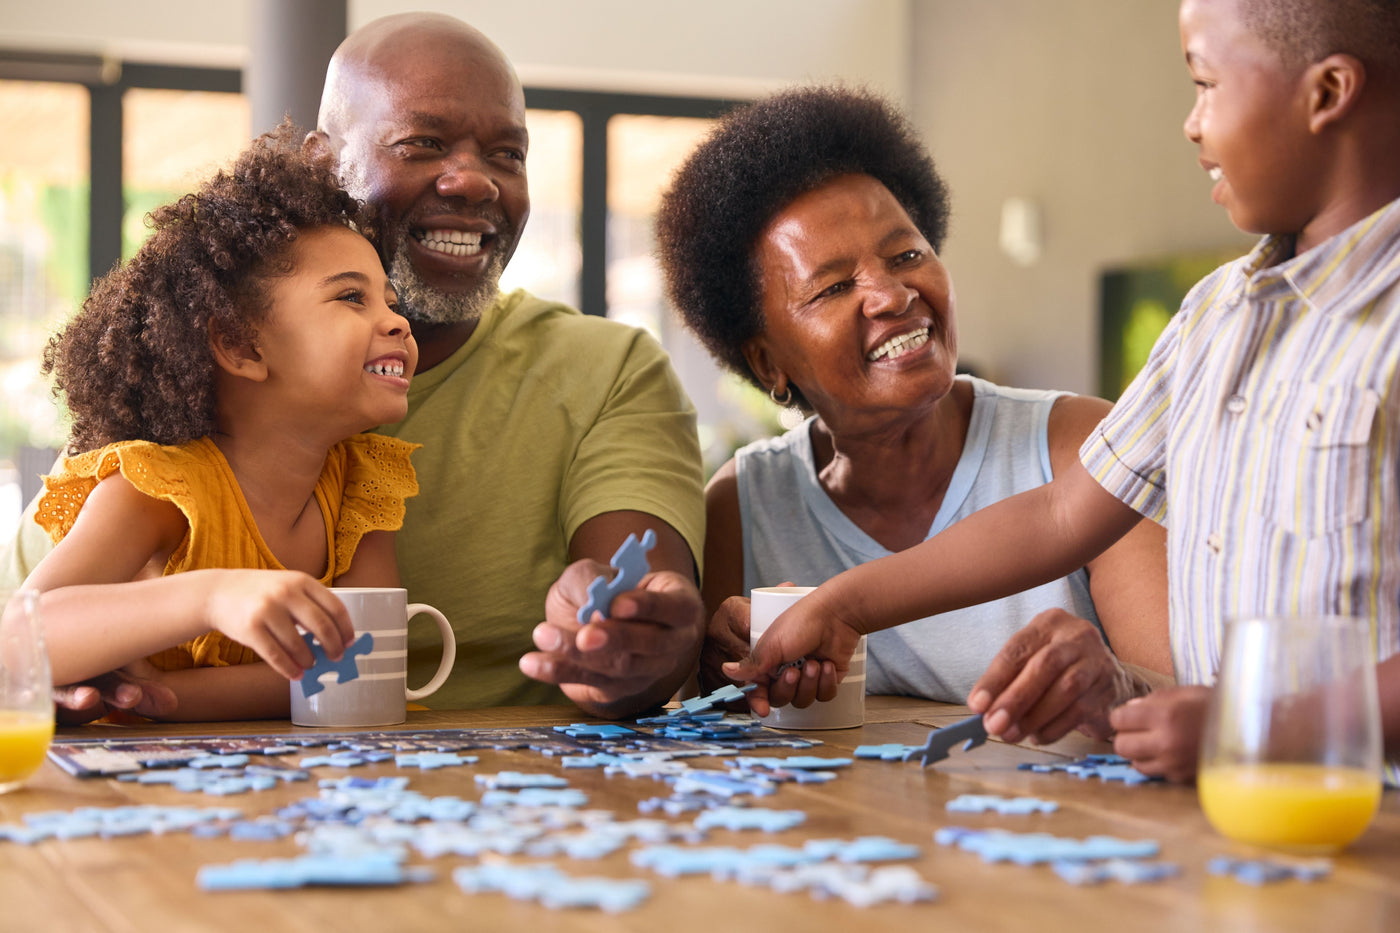 Family Puzzle time, working a puzzle with the family or friends creates connection and bonding opportunities - Puzzles for family, puzzles with friends, puzzles with community